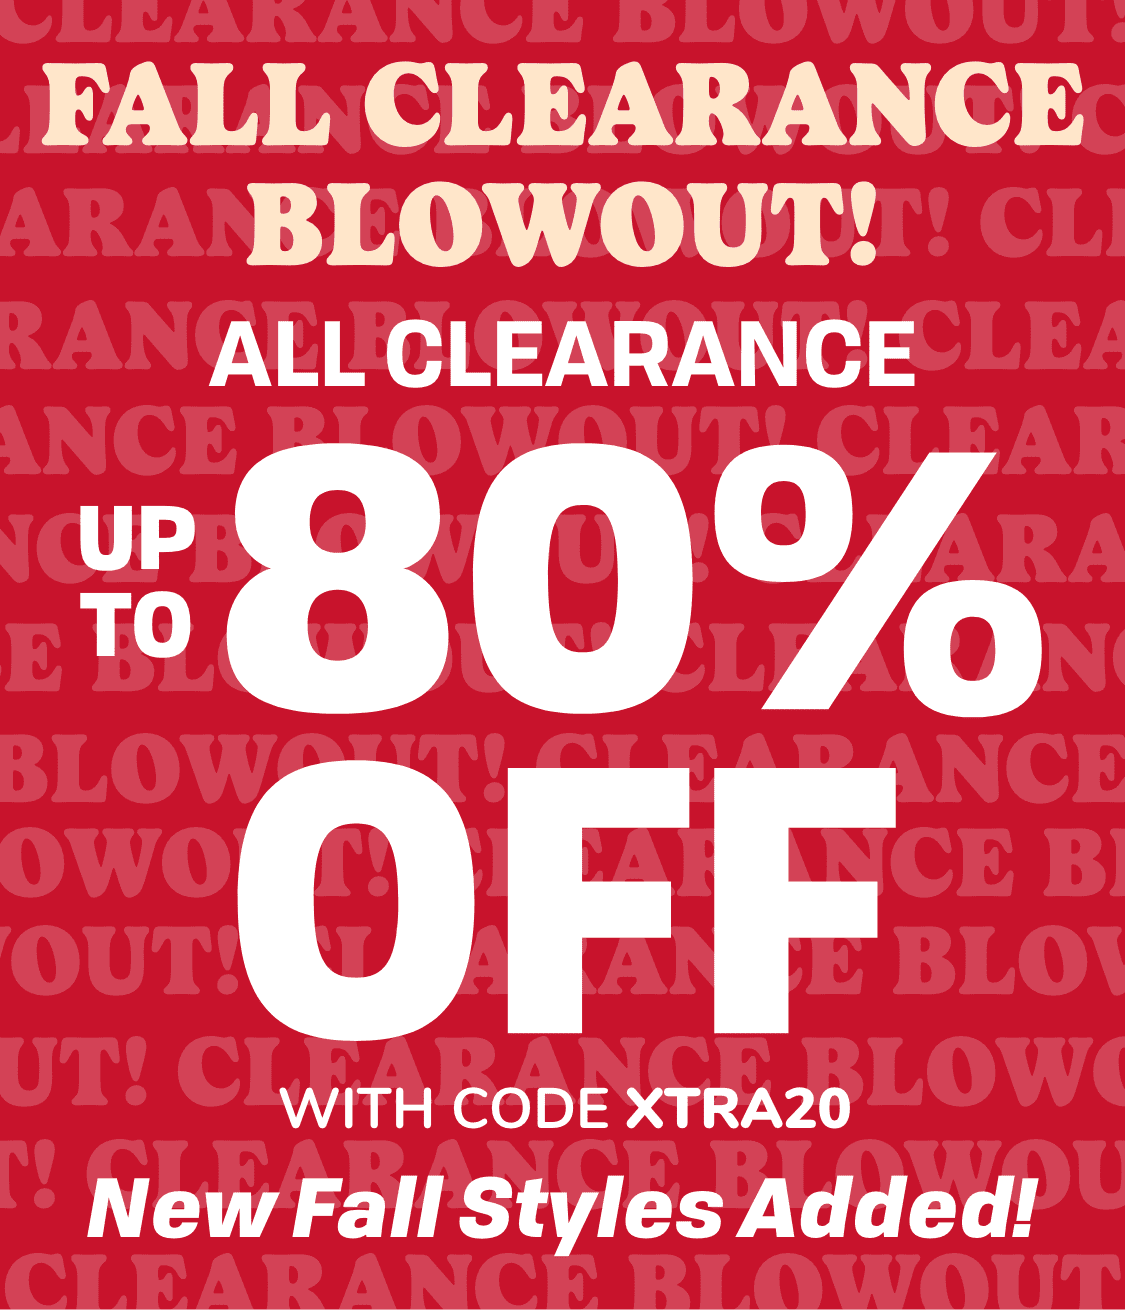 All Clearance 70-80% Off